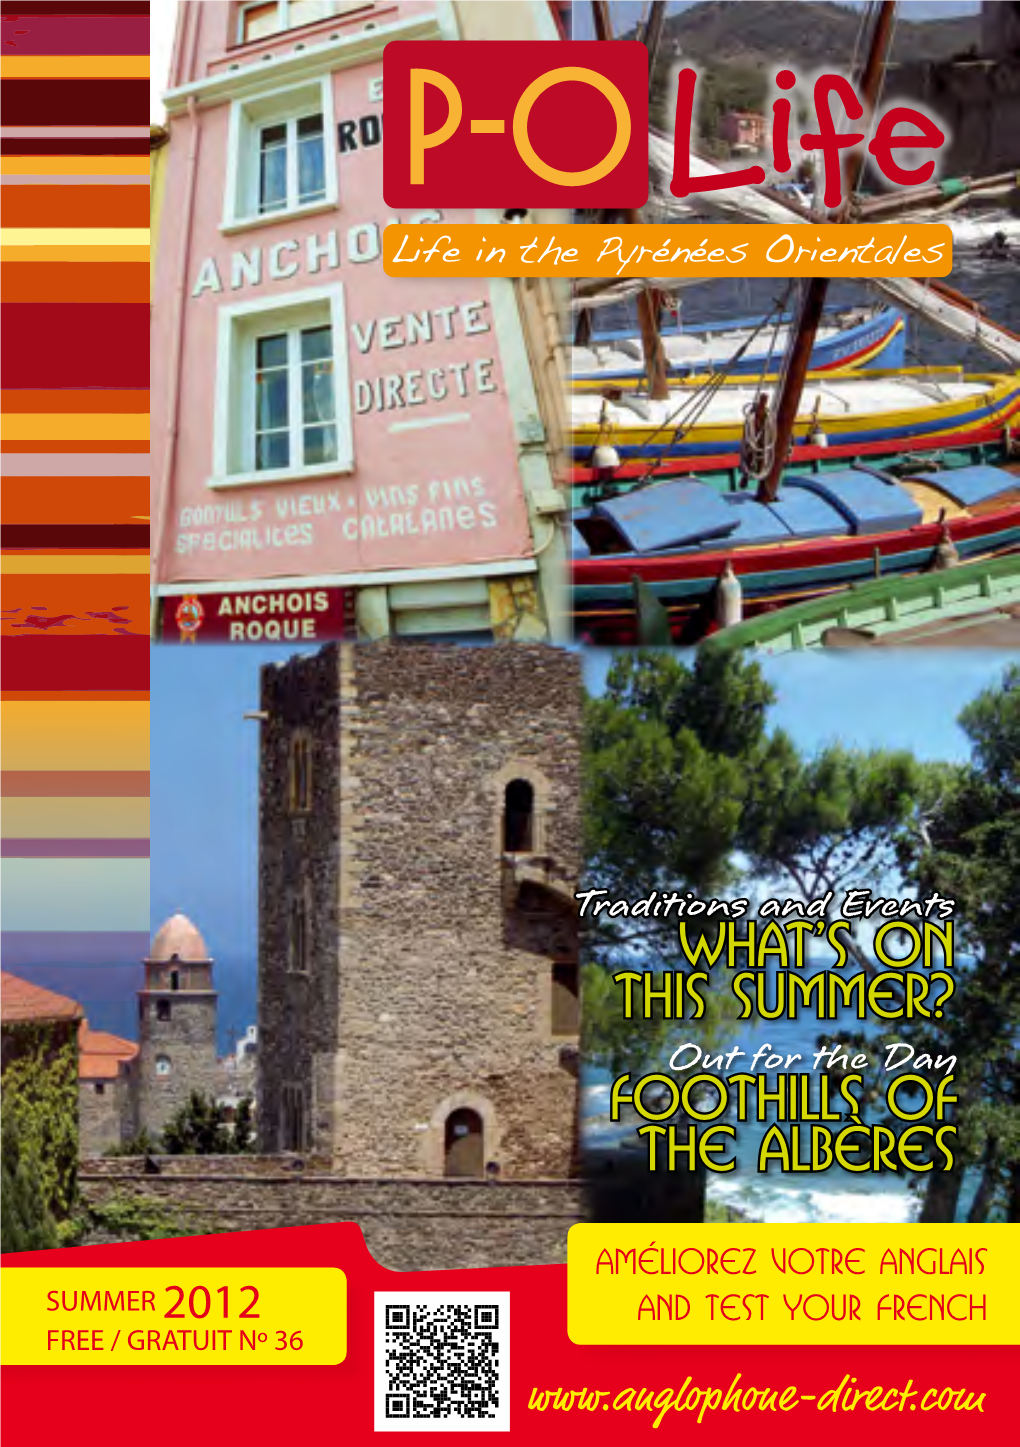 Foothills of the Albères What's on This Summer?